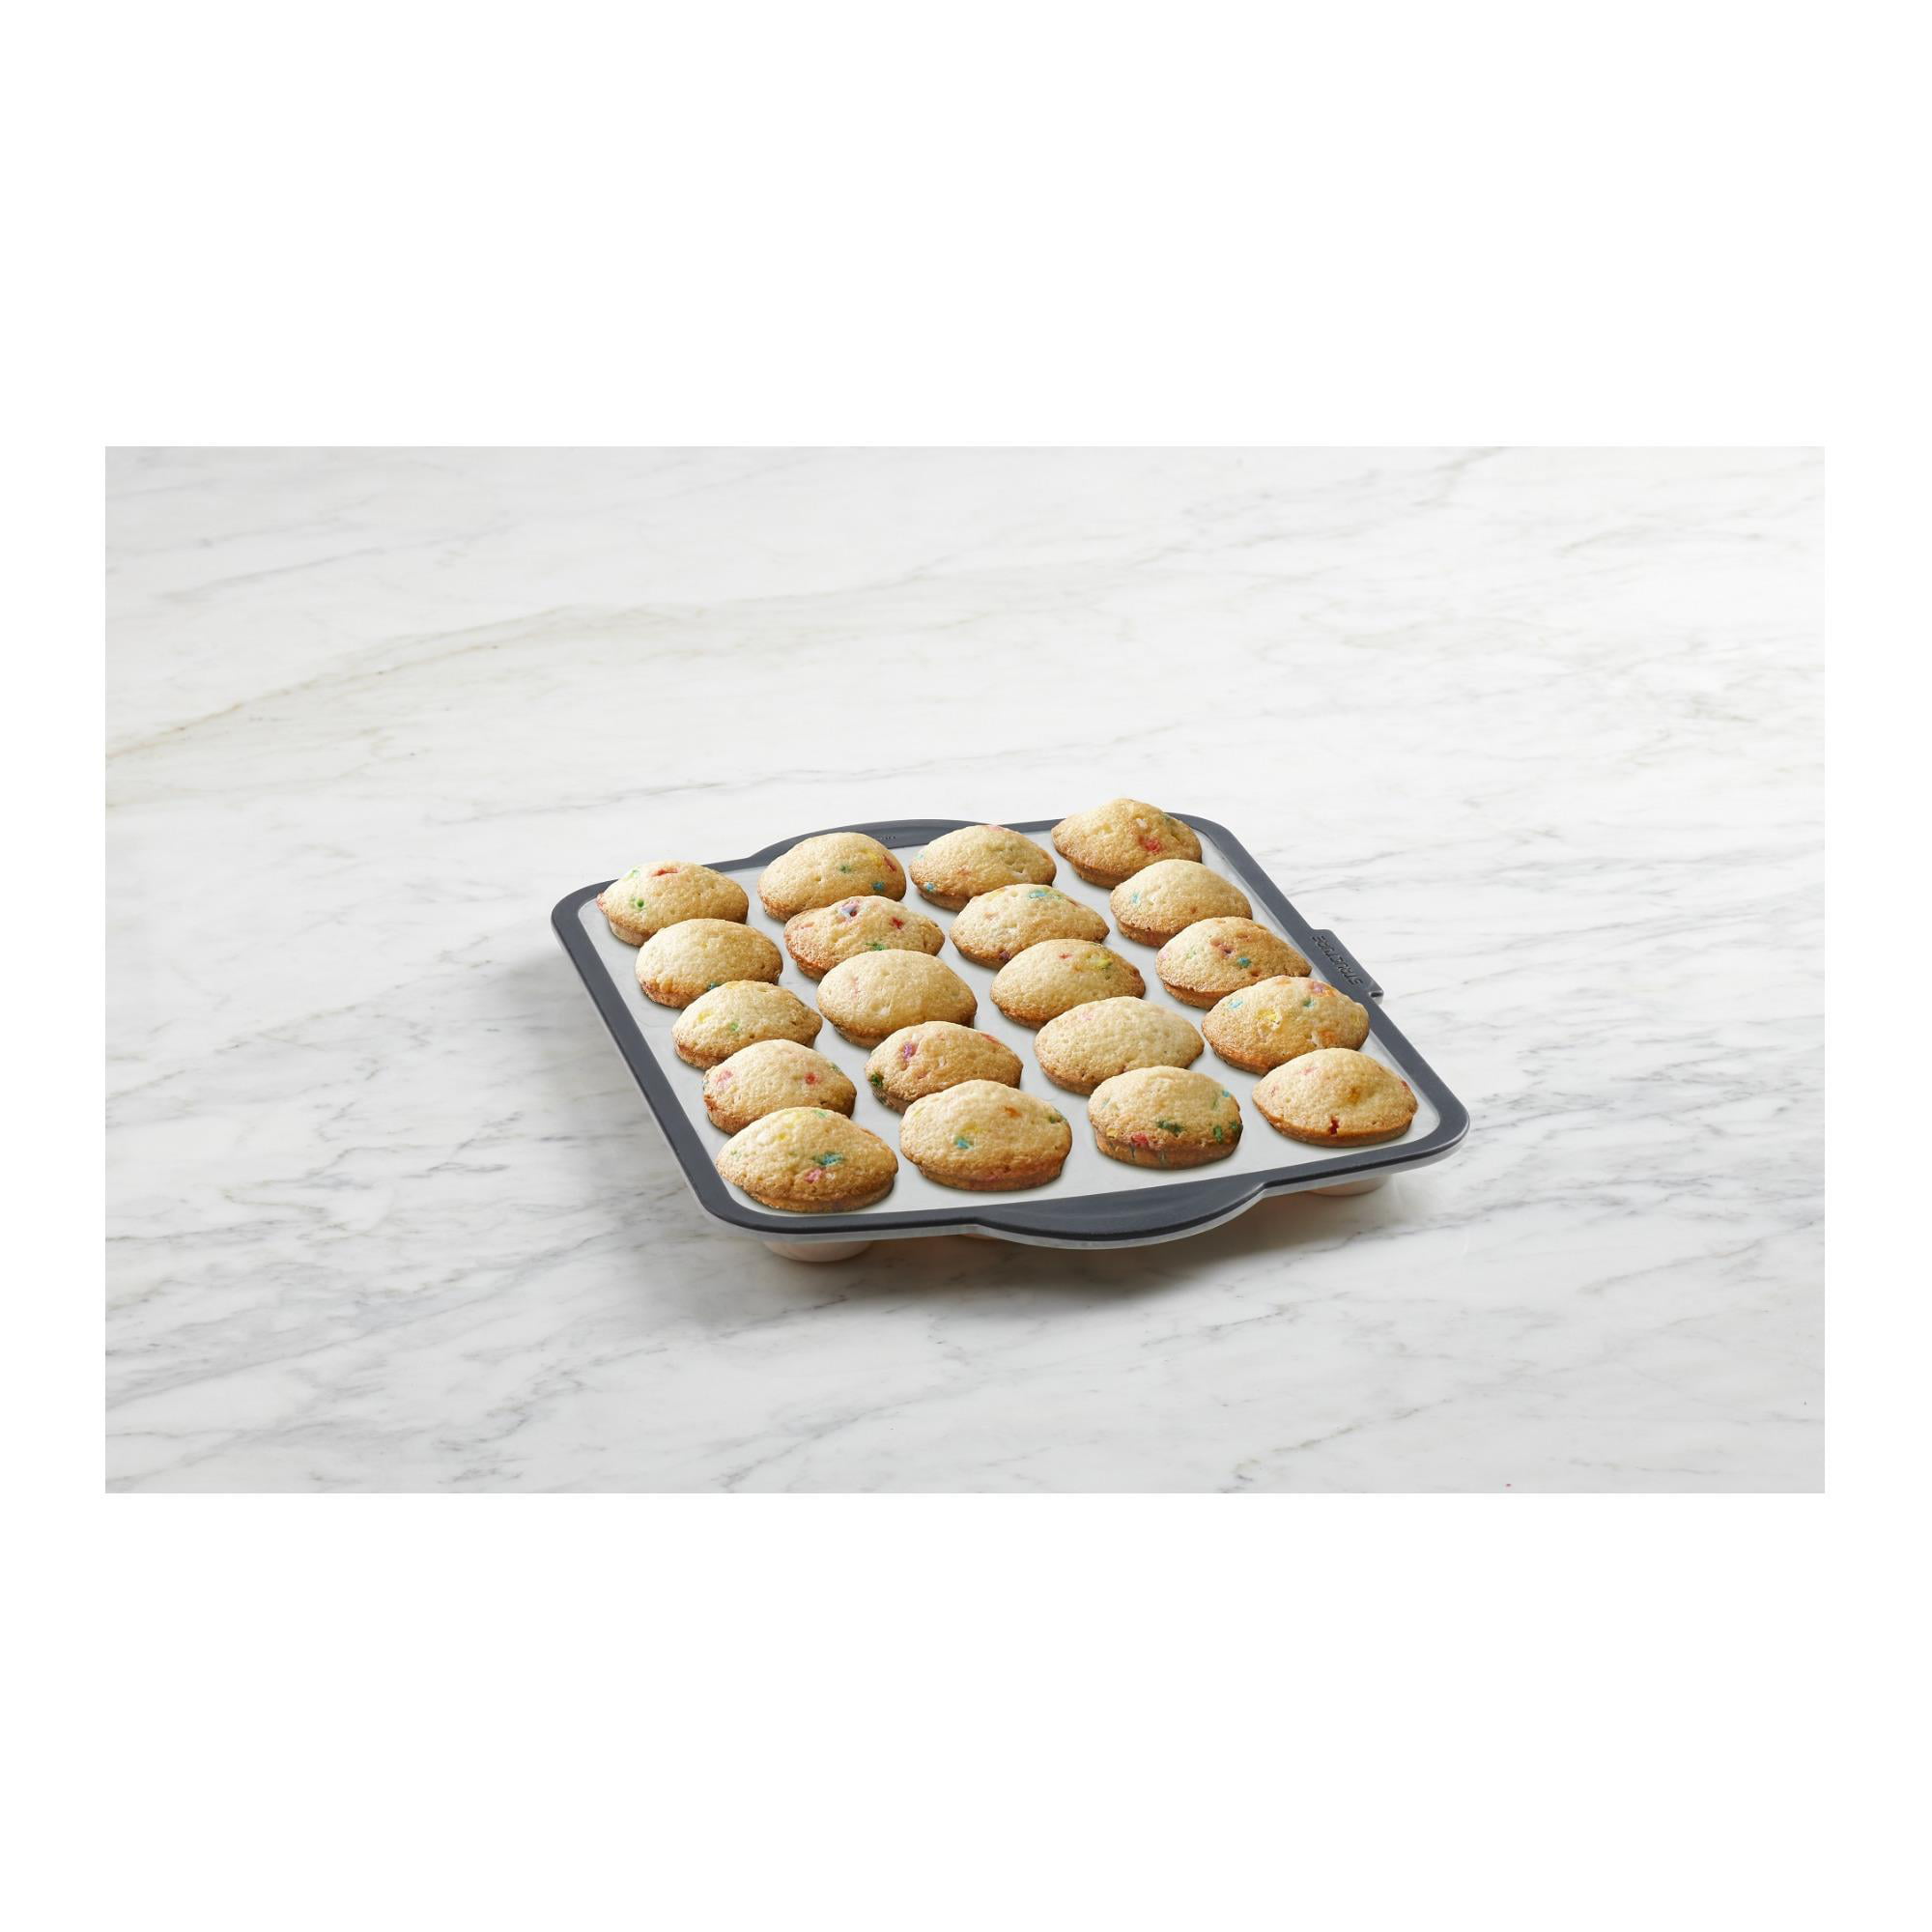  Trudeau Structure Silicone Muffin Pan, 24 Cup Mini, Grey/Mint:  Home & Kitchen